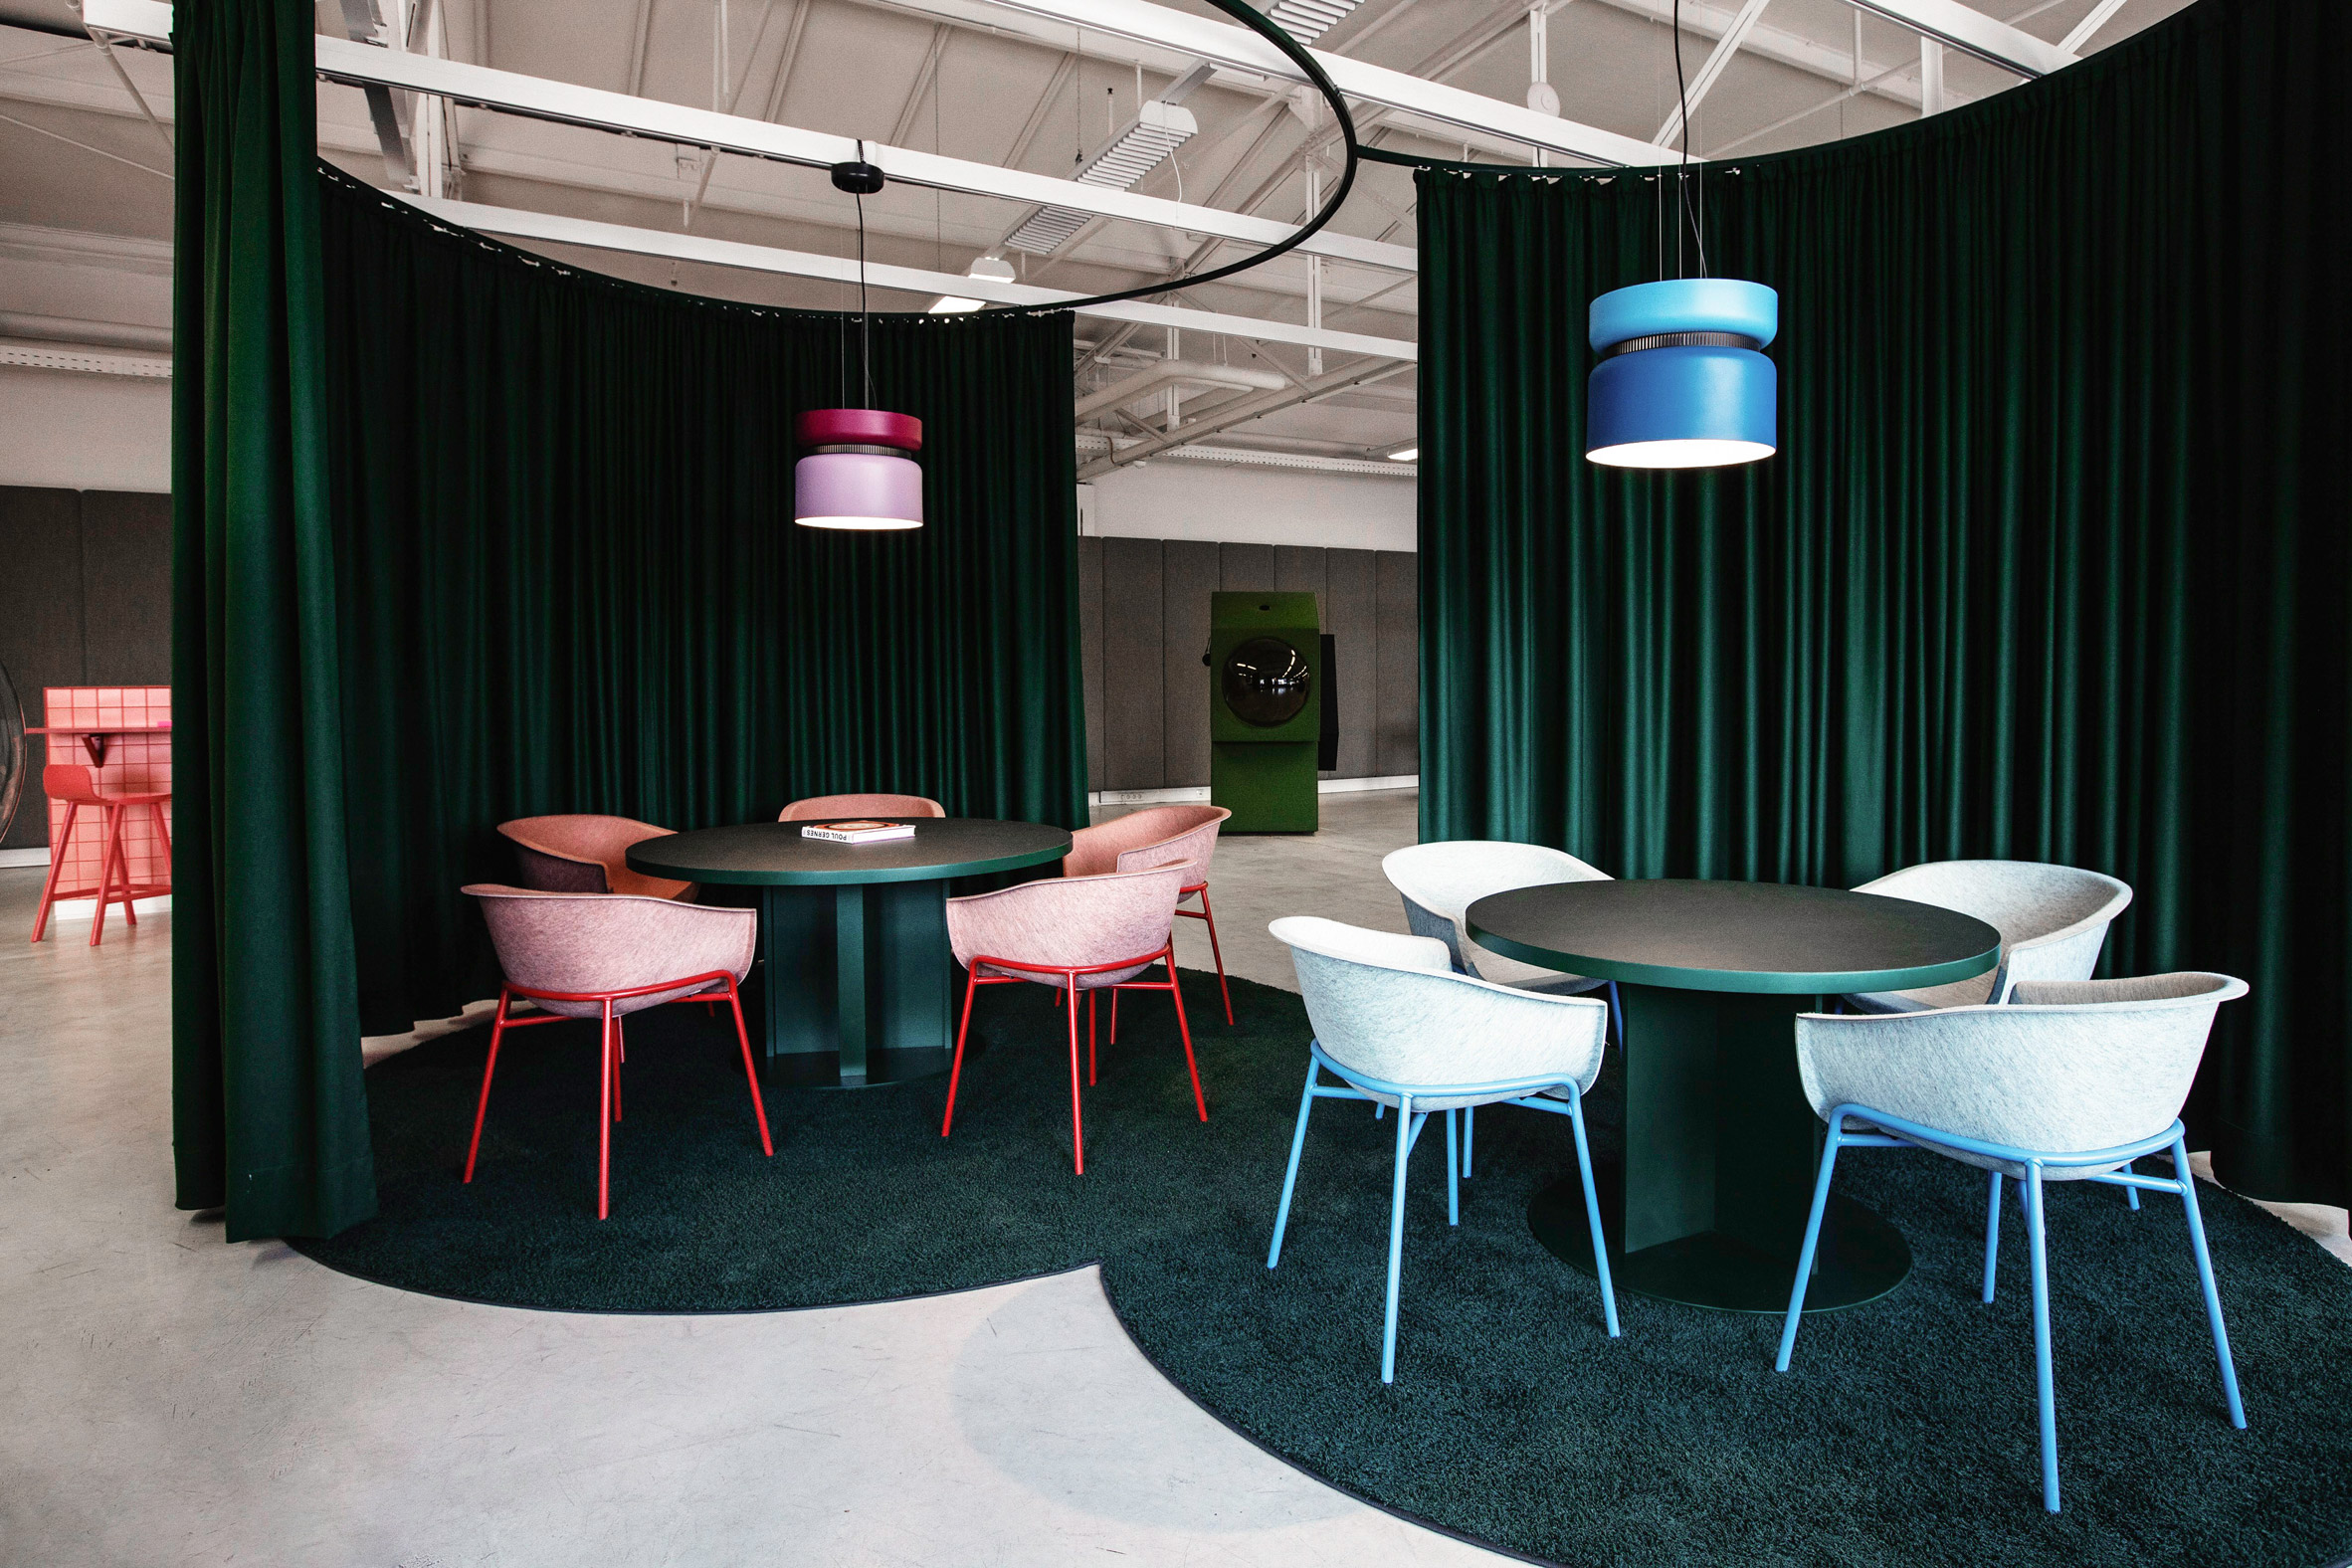 Two meeting rooms in LOQI Activity Office by Studio Aisslinger